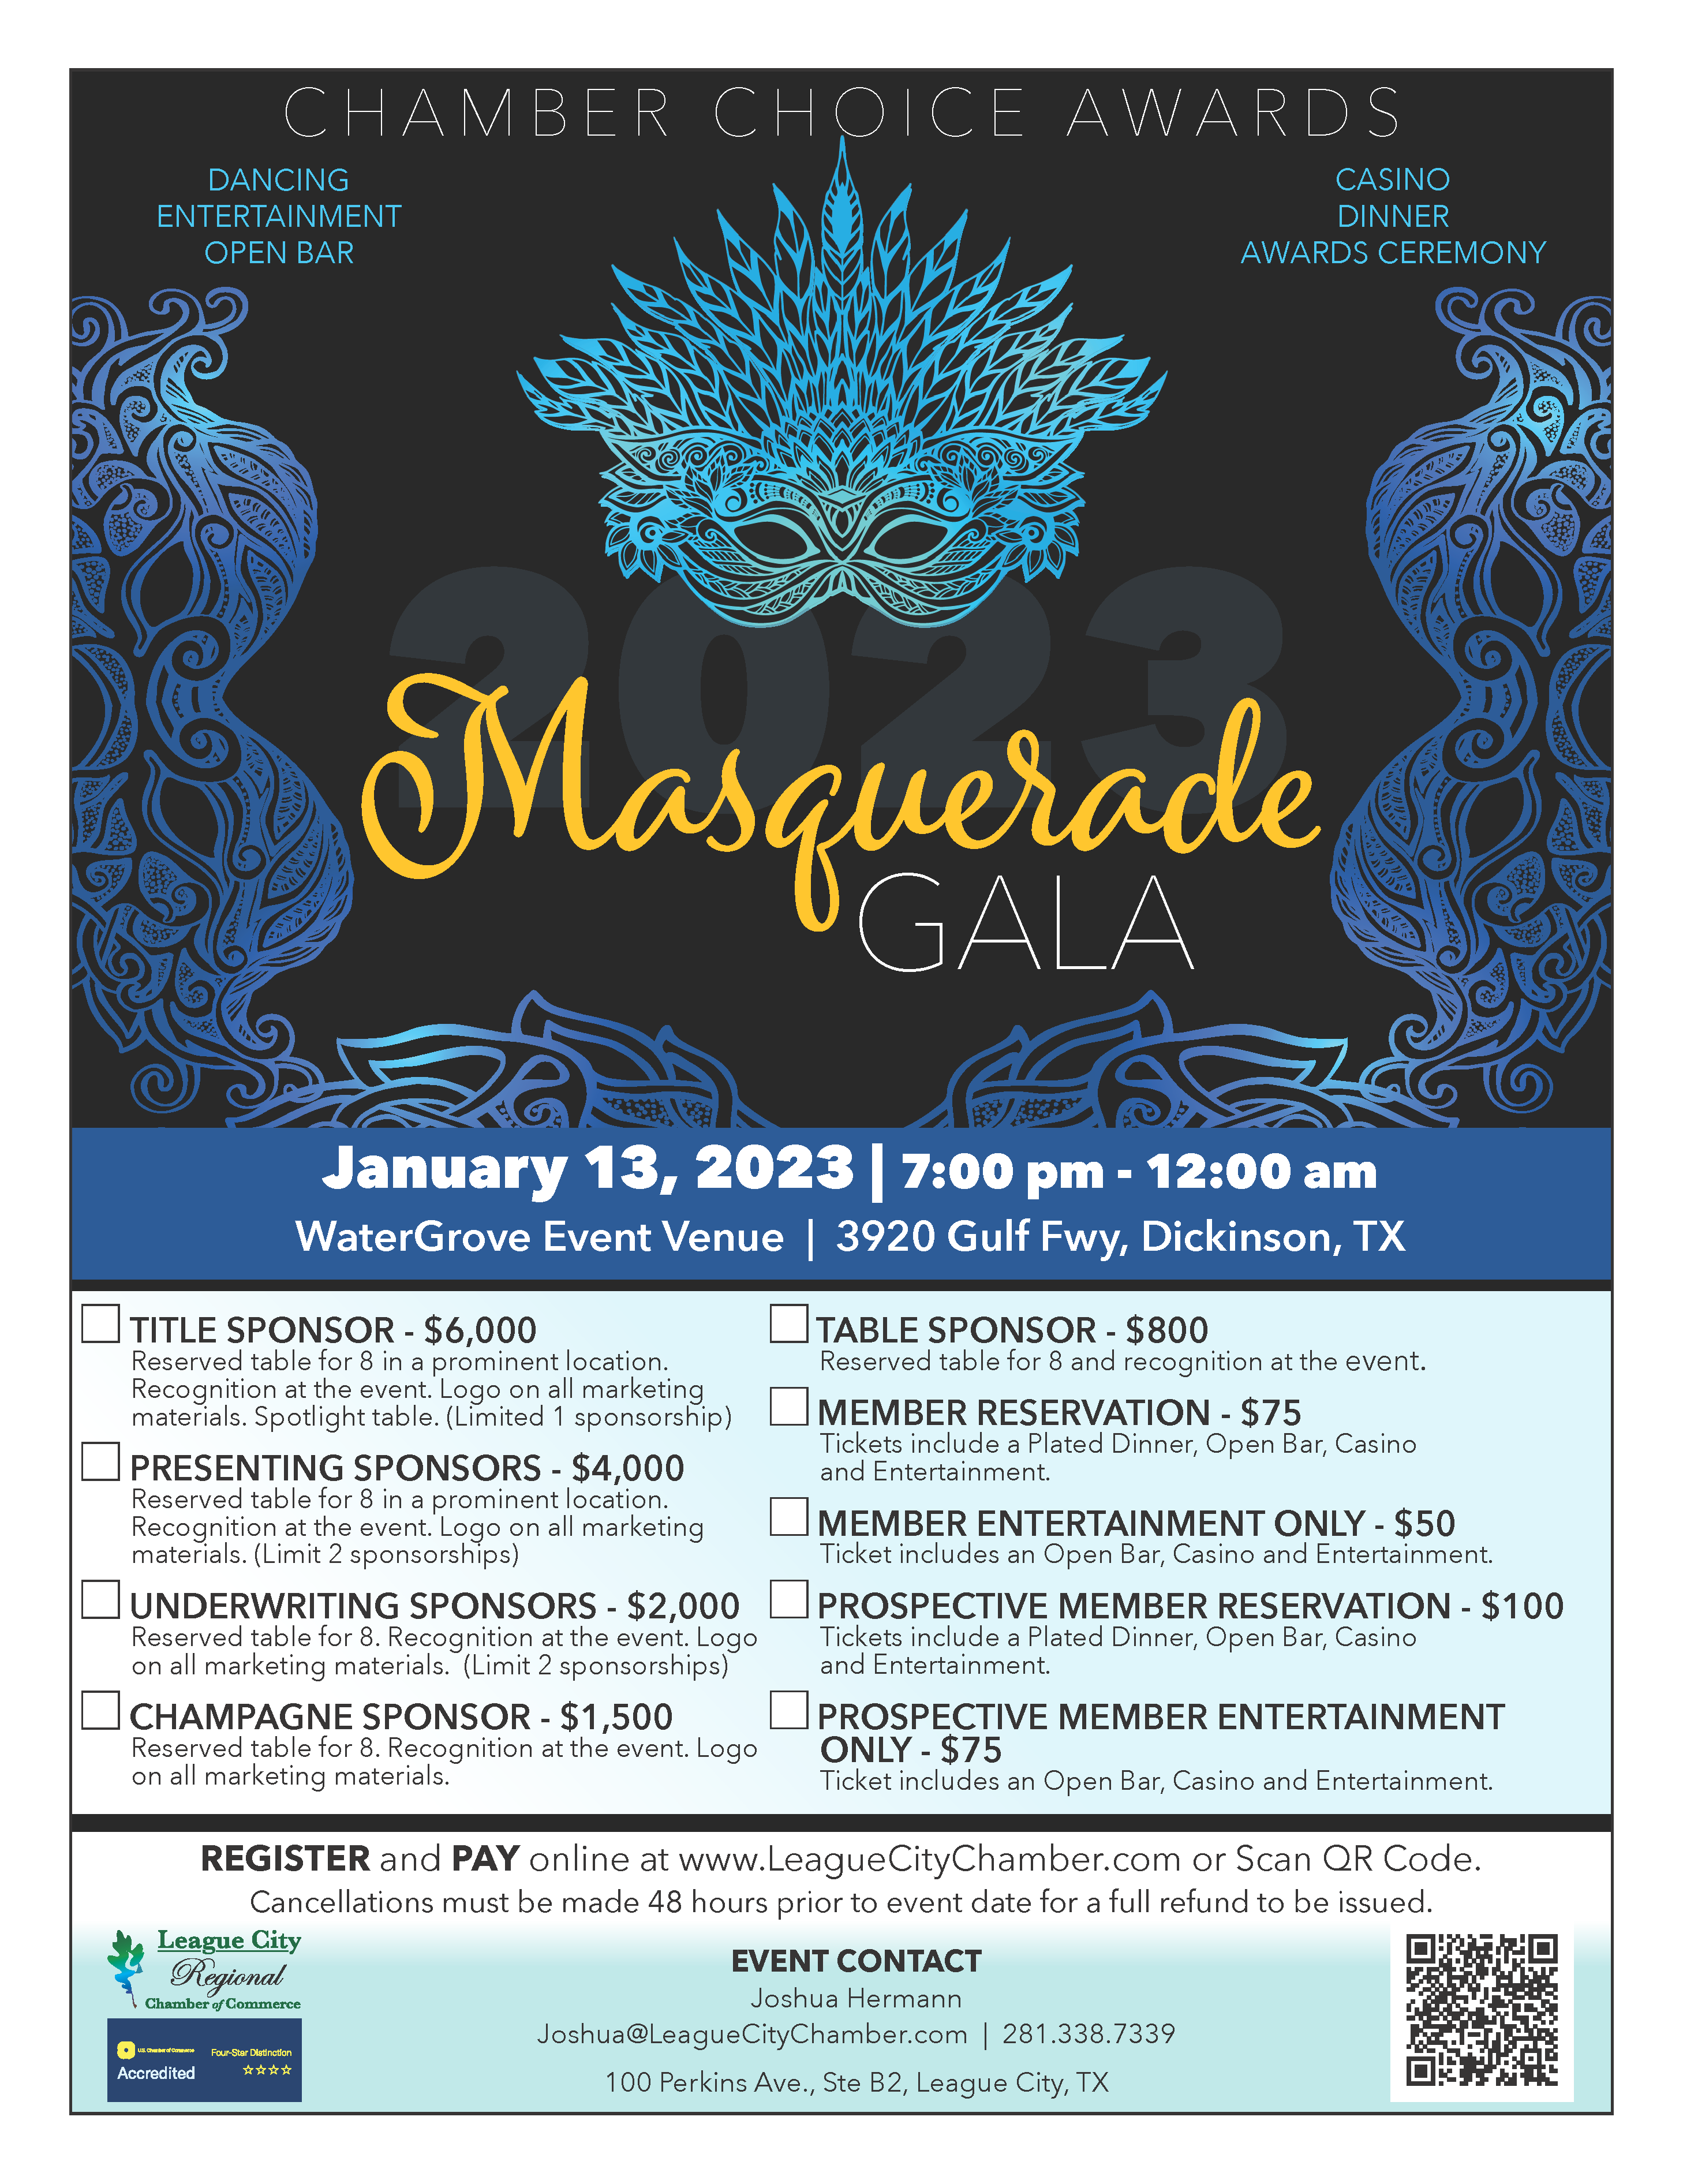 Image for PRESS RELEASE: League City Regional Chamber of Commerce to have the first Masquerade Award Gala!